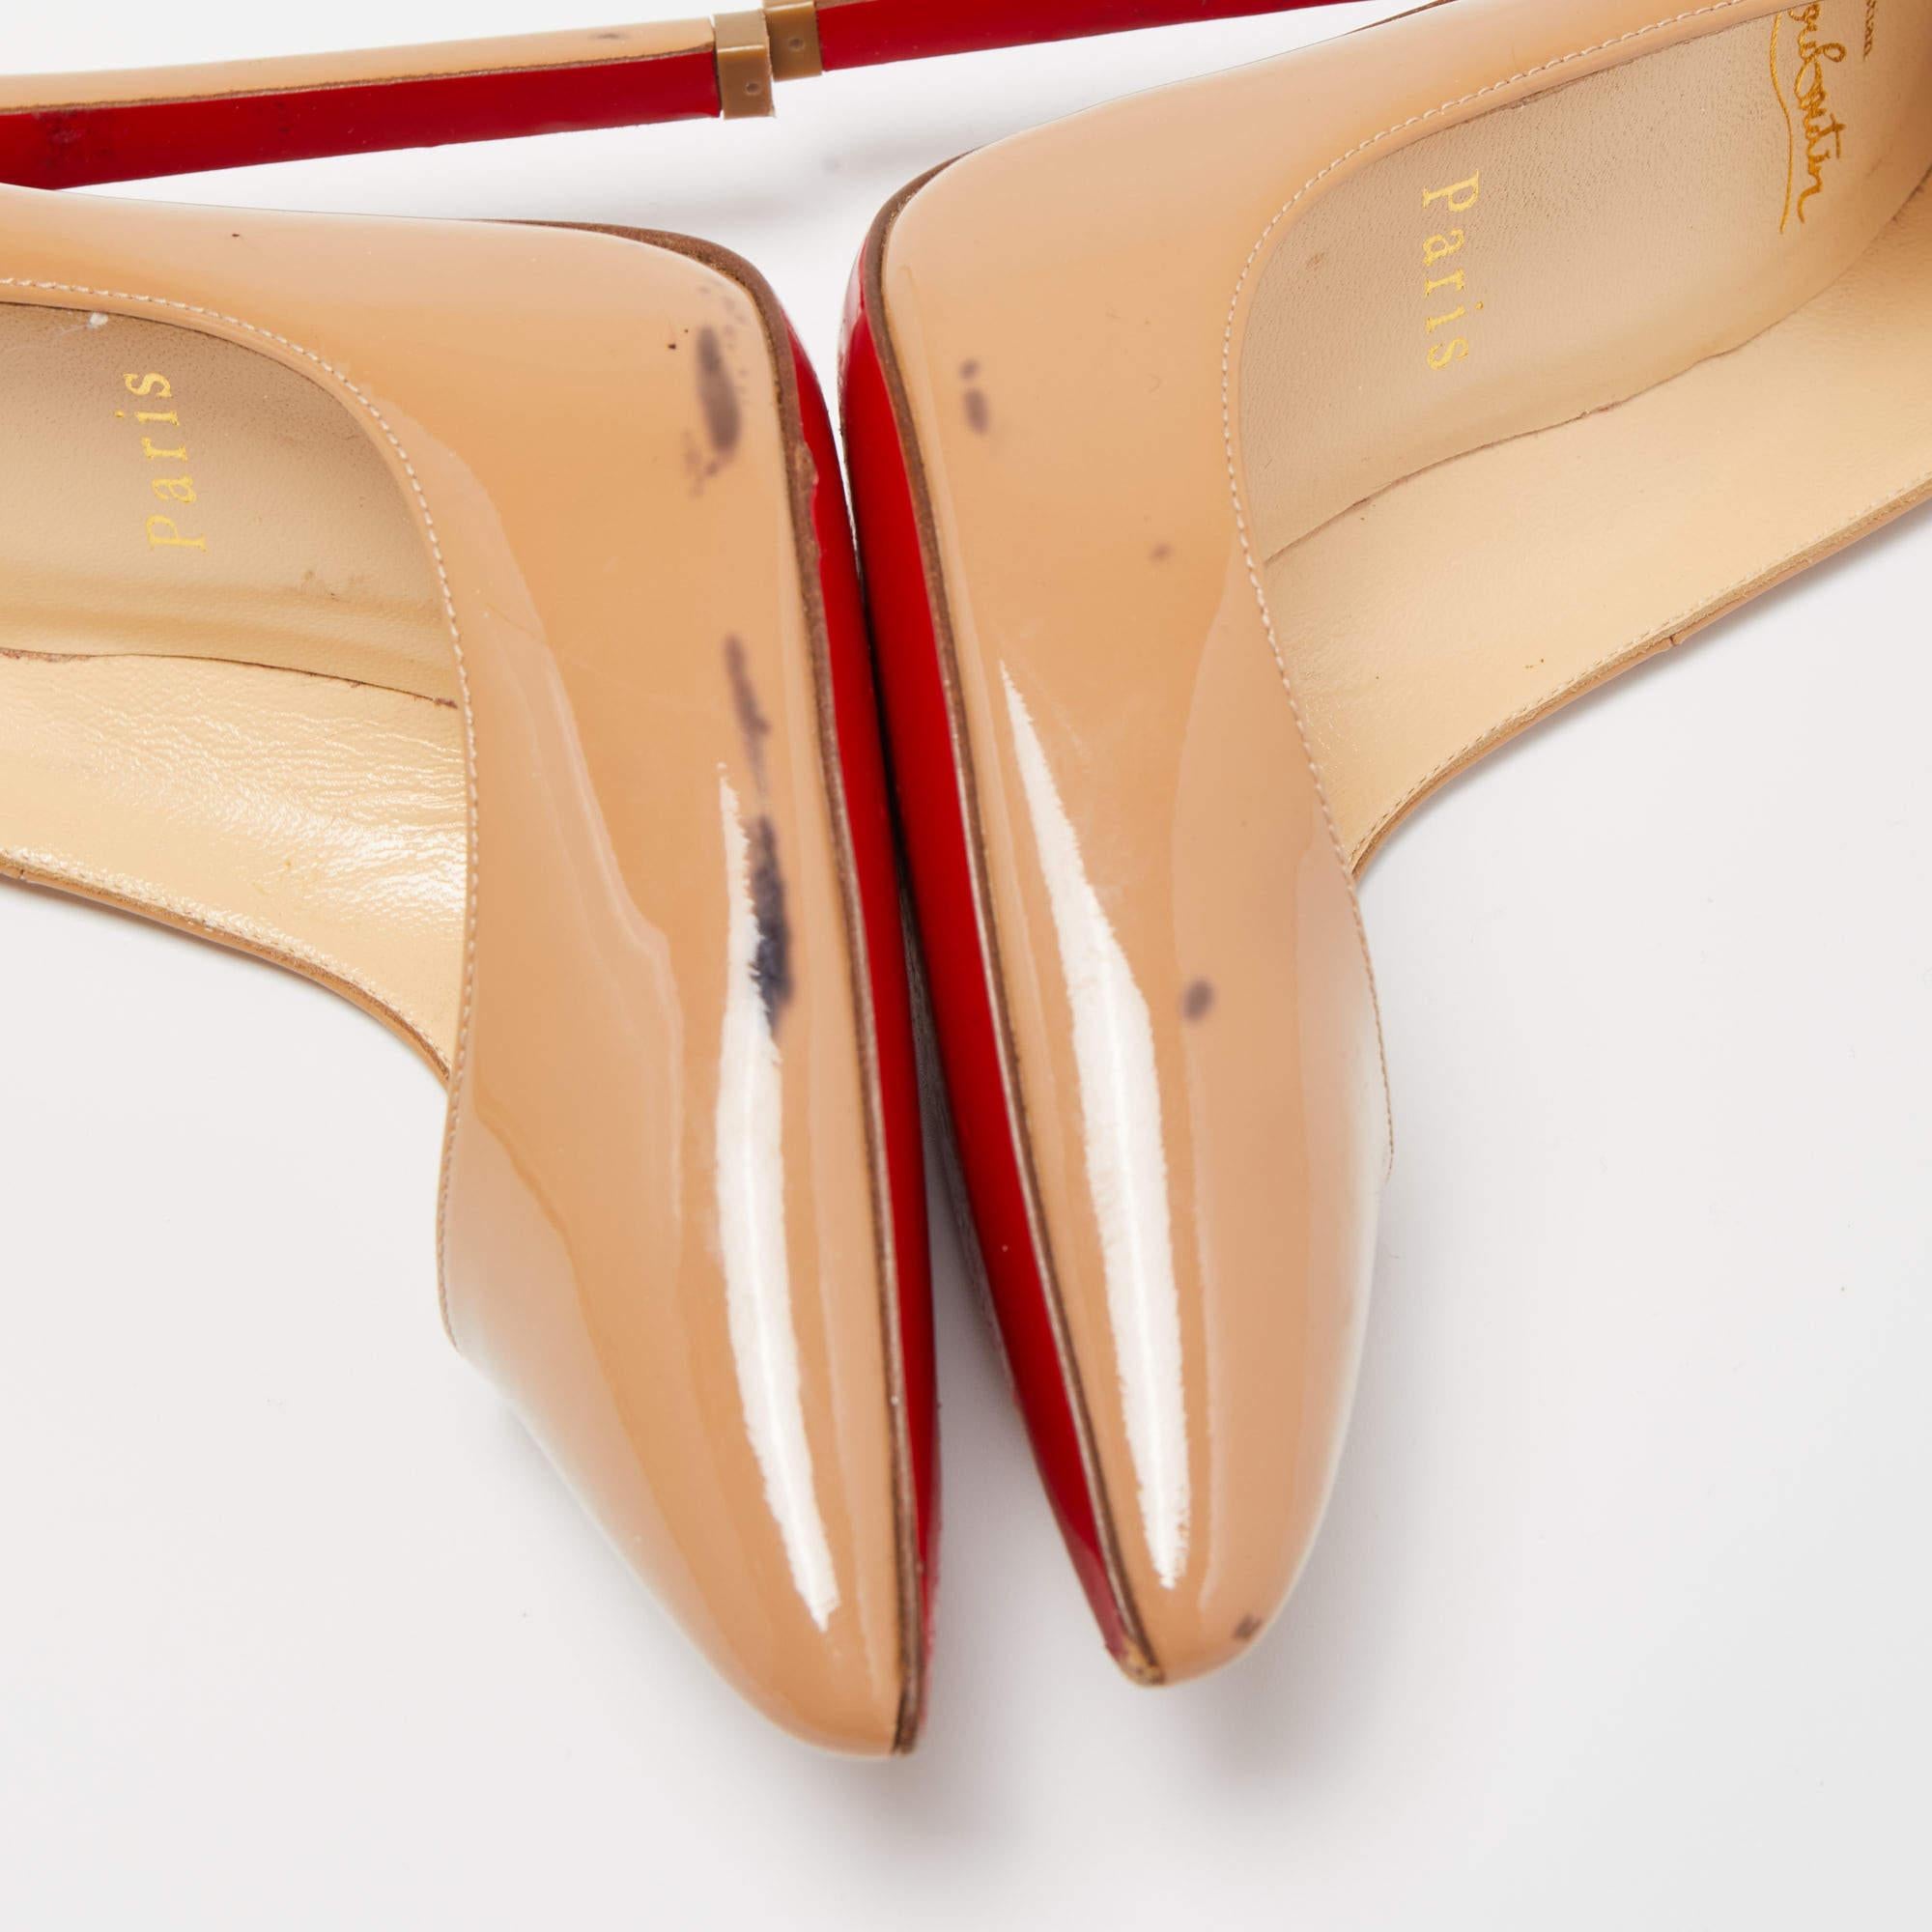 Christian Louboutin Beige Patent Leather So Kate Pointed Toe Pumps Size 37.5 1